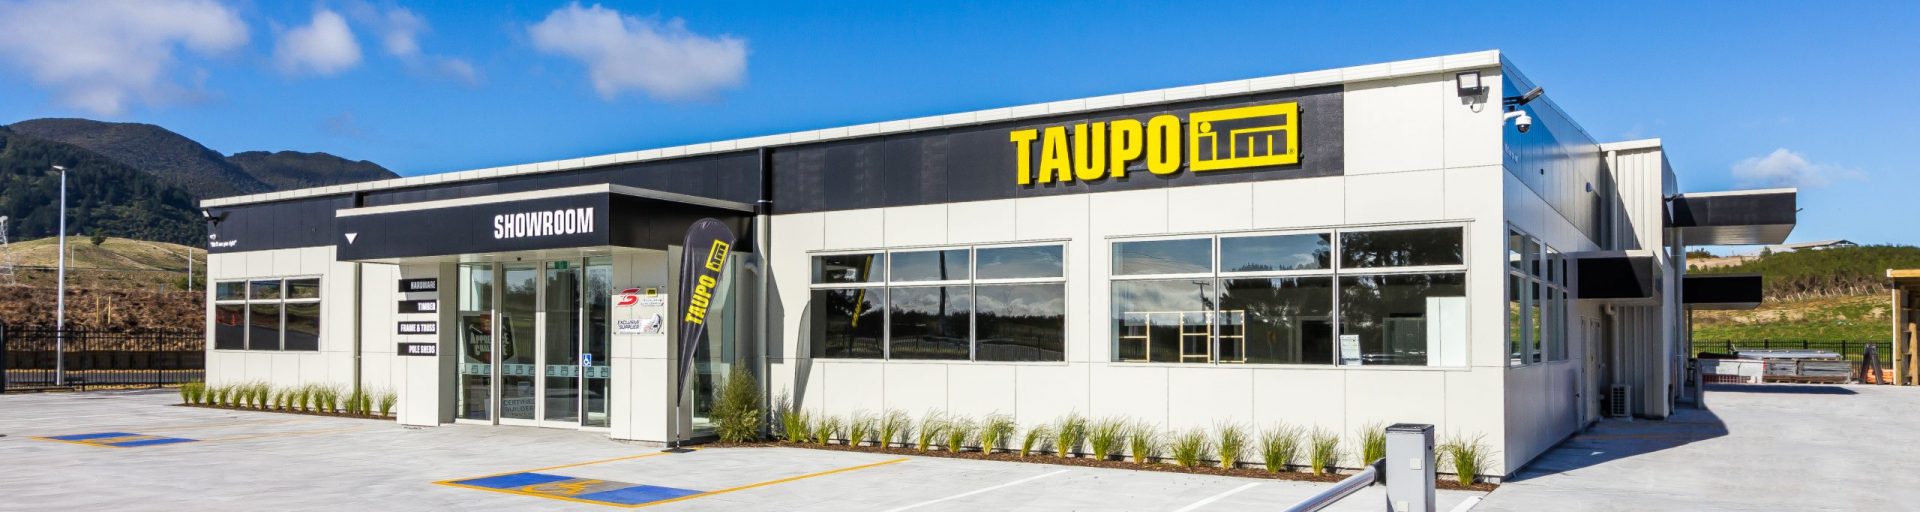 taupo itm storefront by coresteel